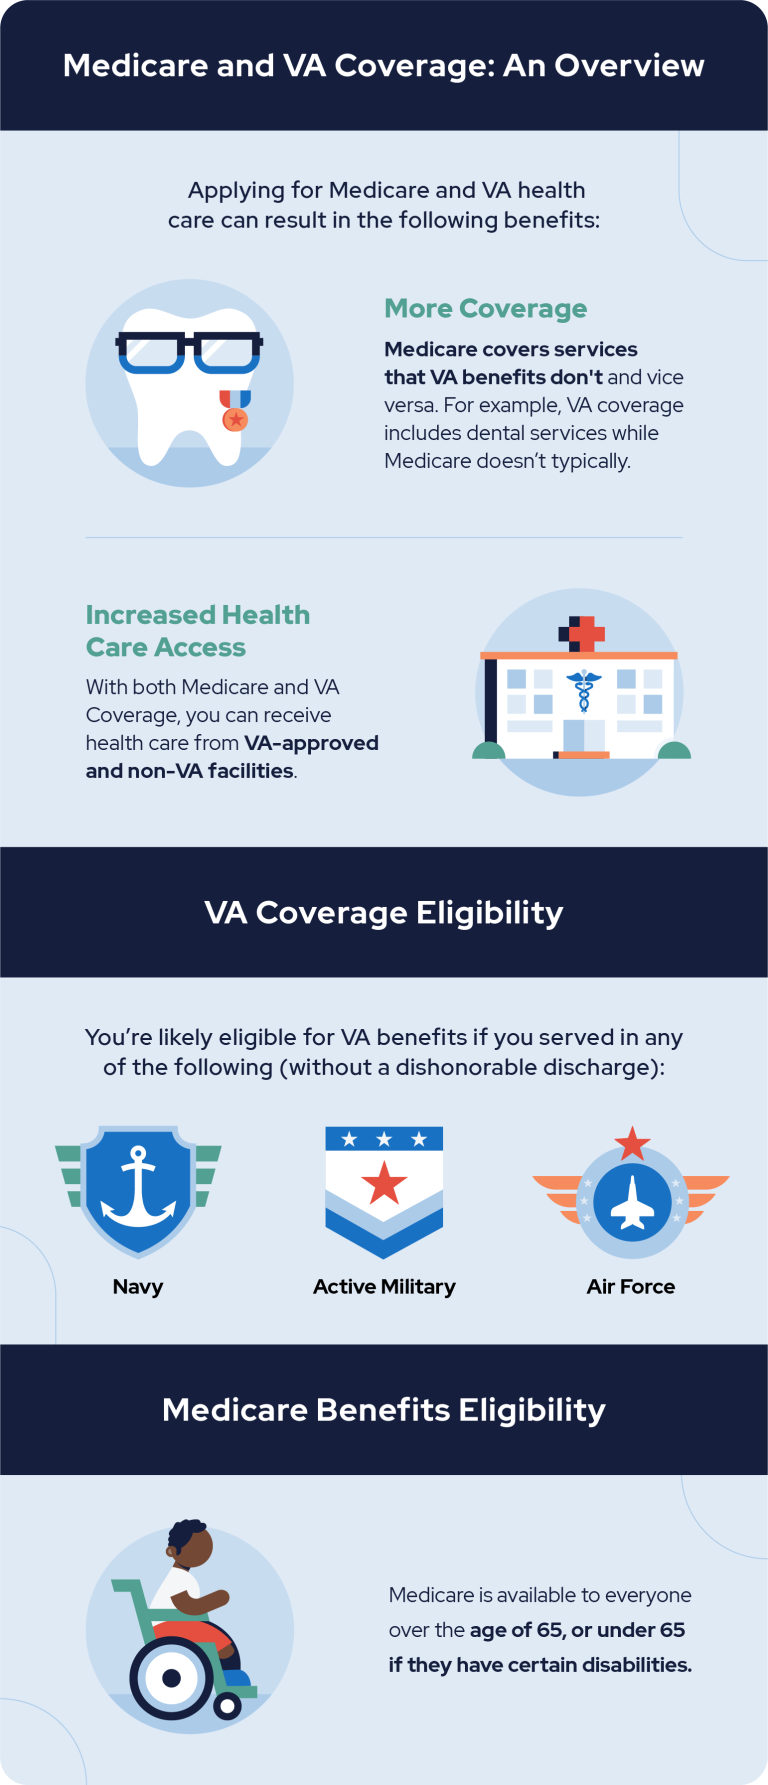 An Overview of Medicare and VA Coverage